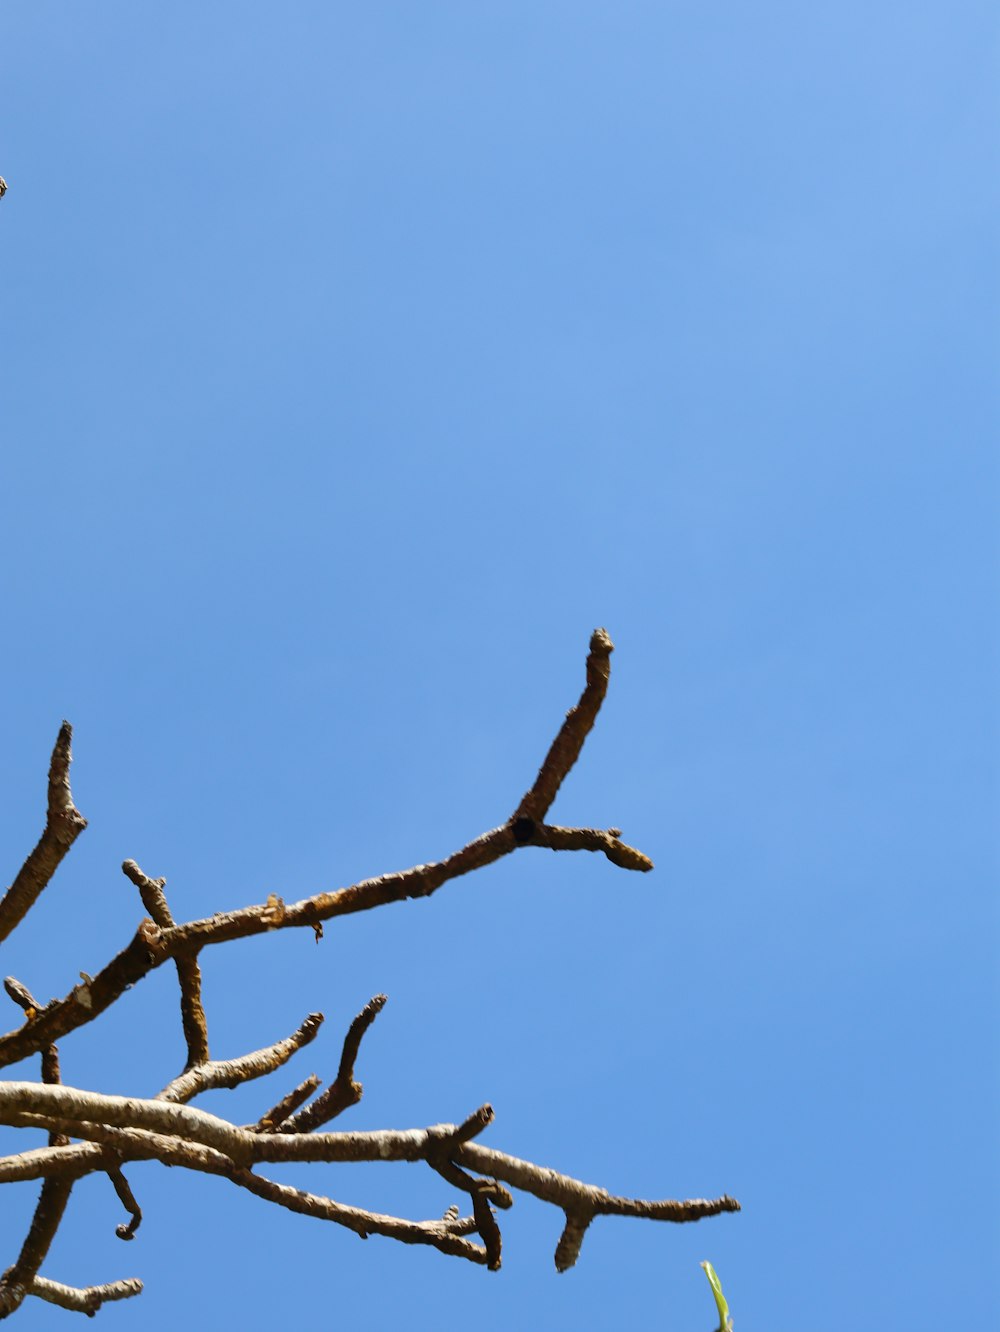 a bird sitting on a tree branch with a blue sky in the background